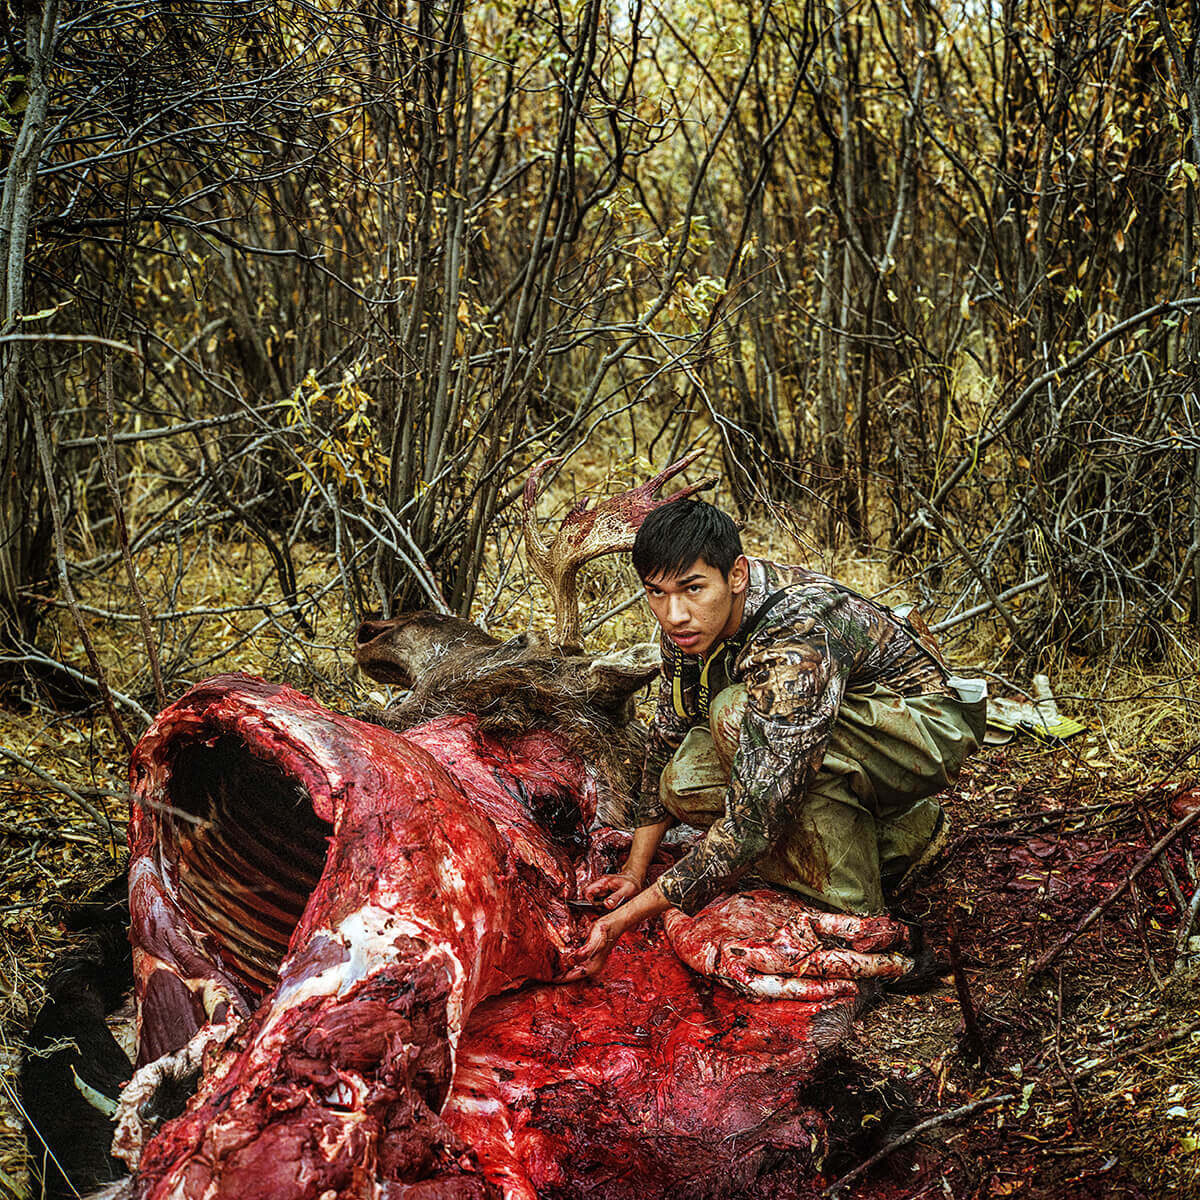 A young Indigenous man cuts apart the carcass of an animal he has hunted.